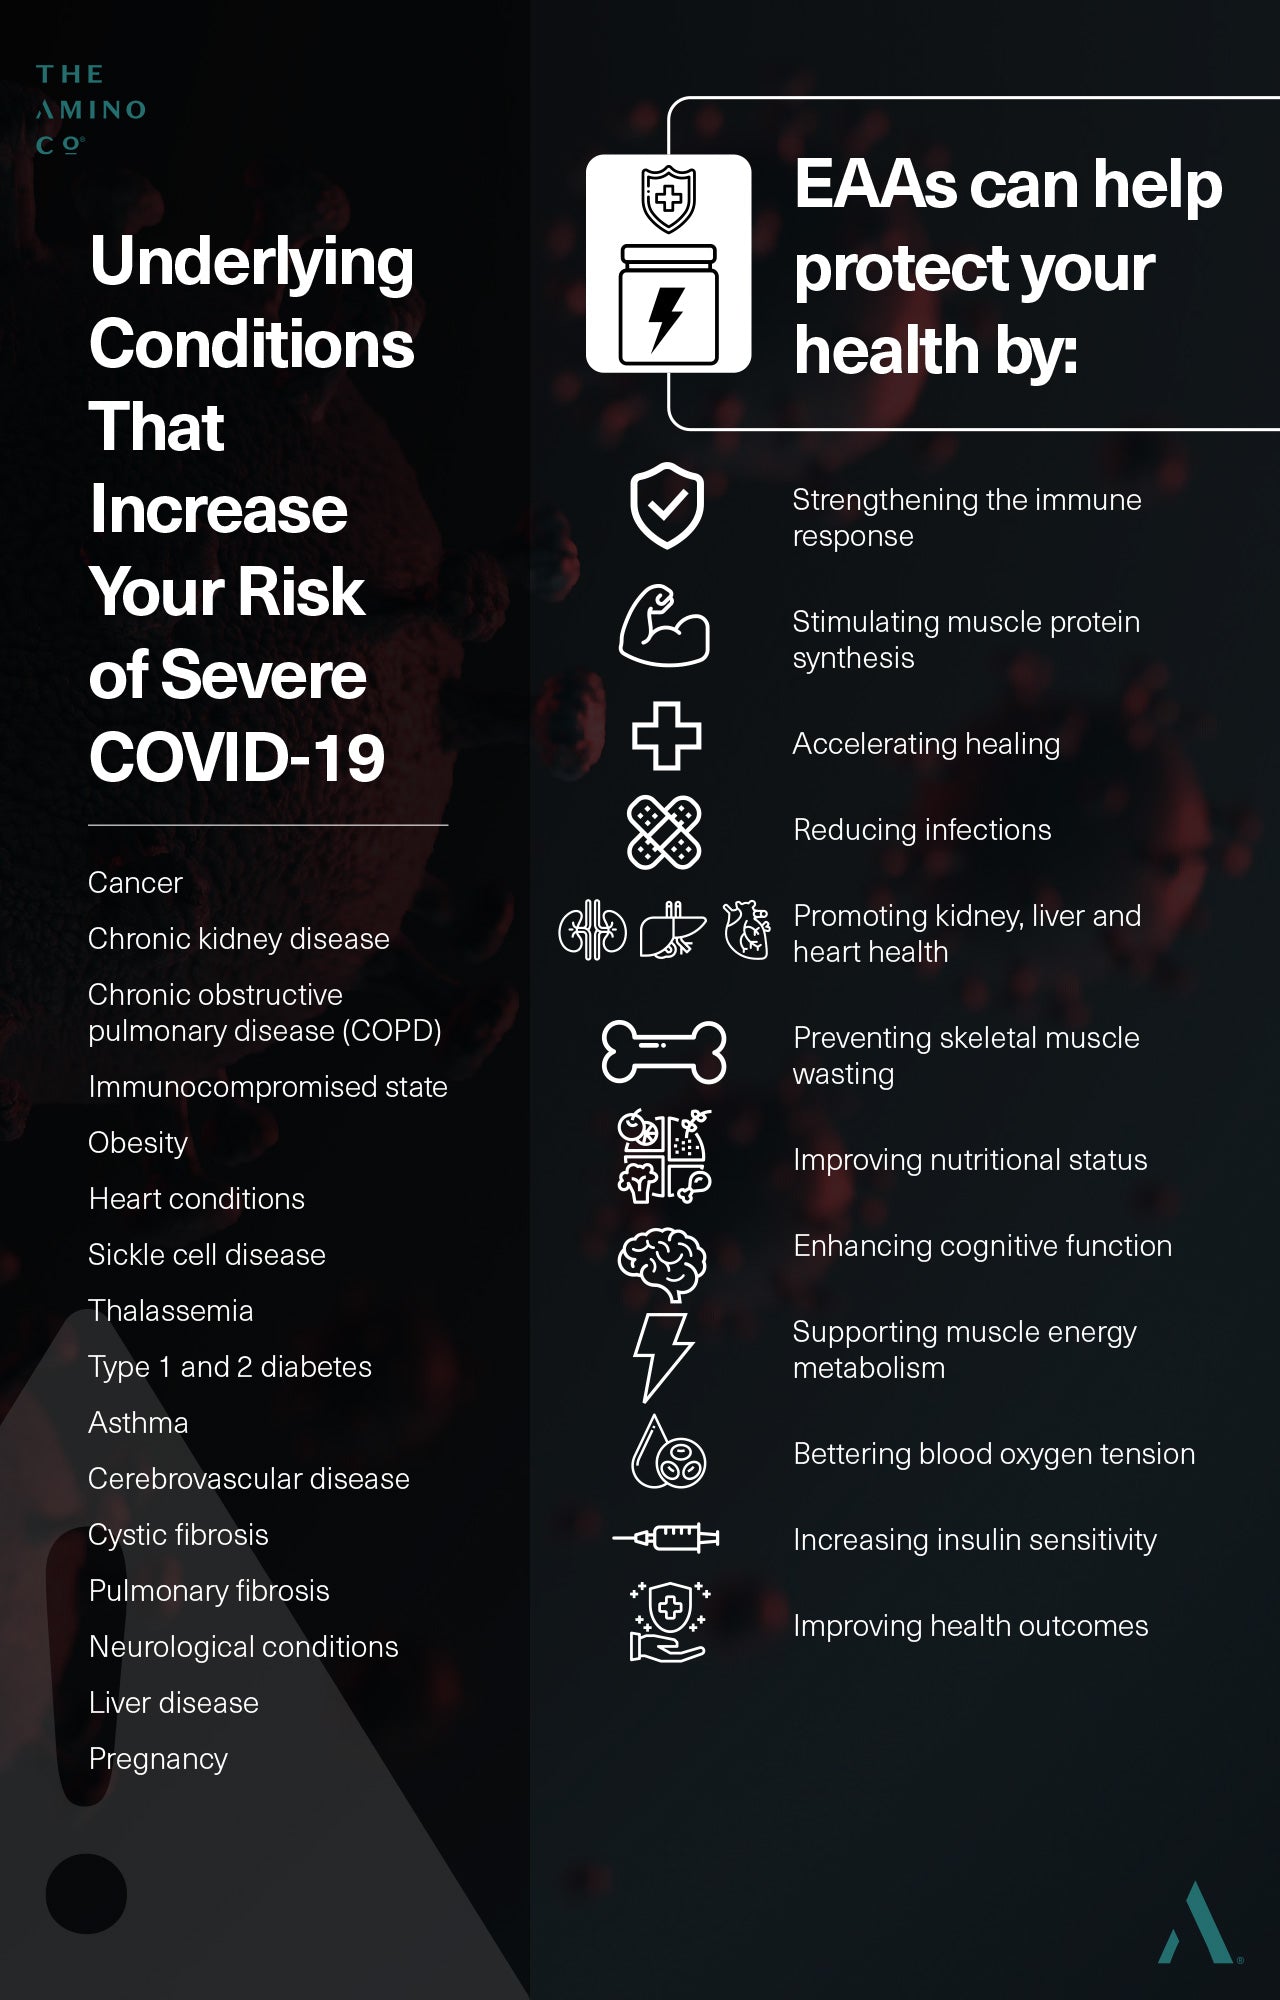 Underlying Conditions That Increase Your Risk of Severe COVID-19